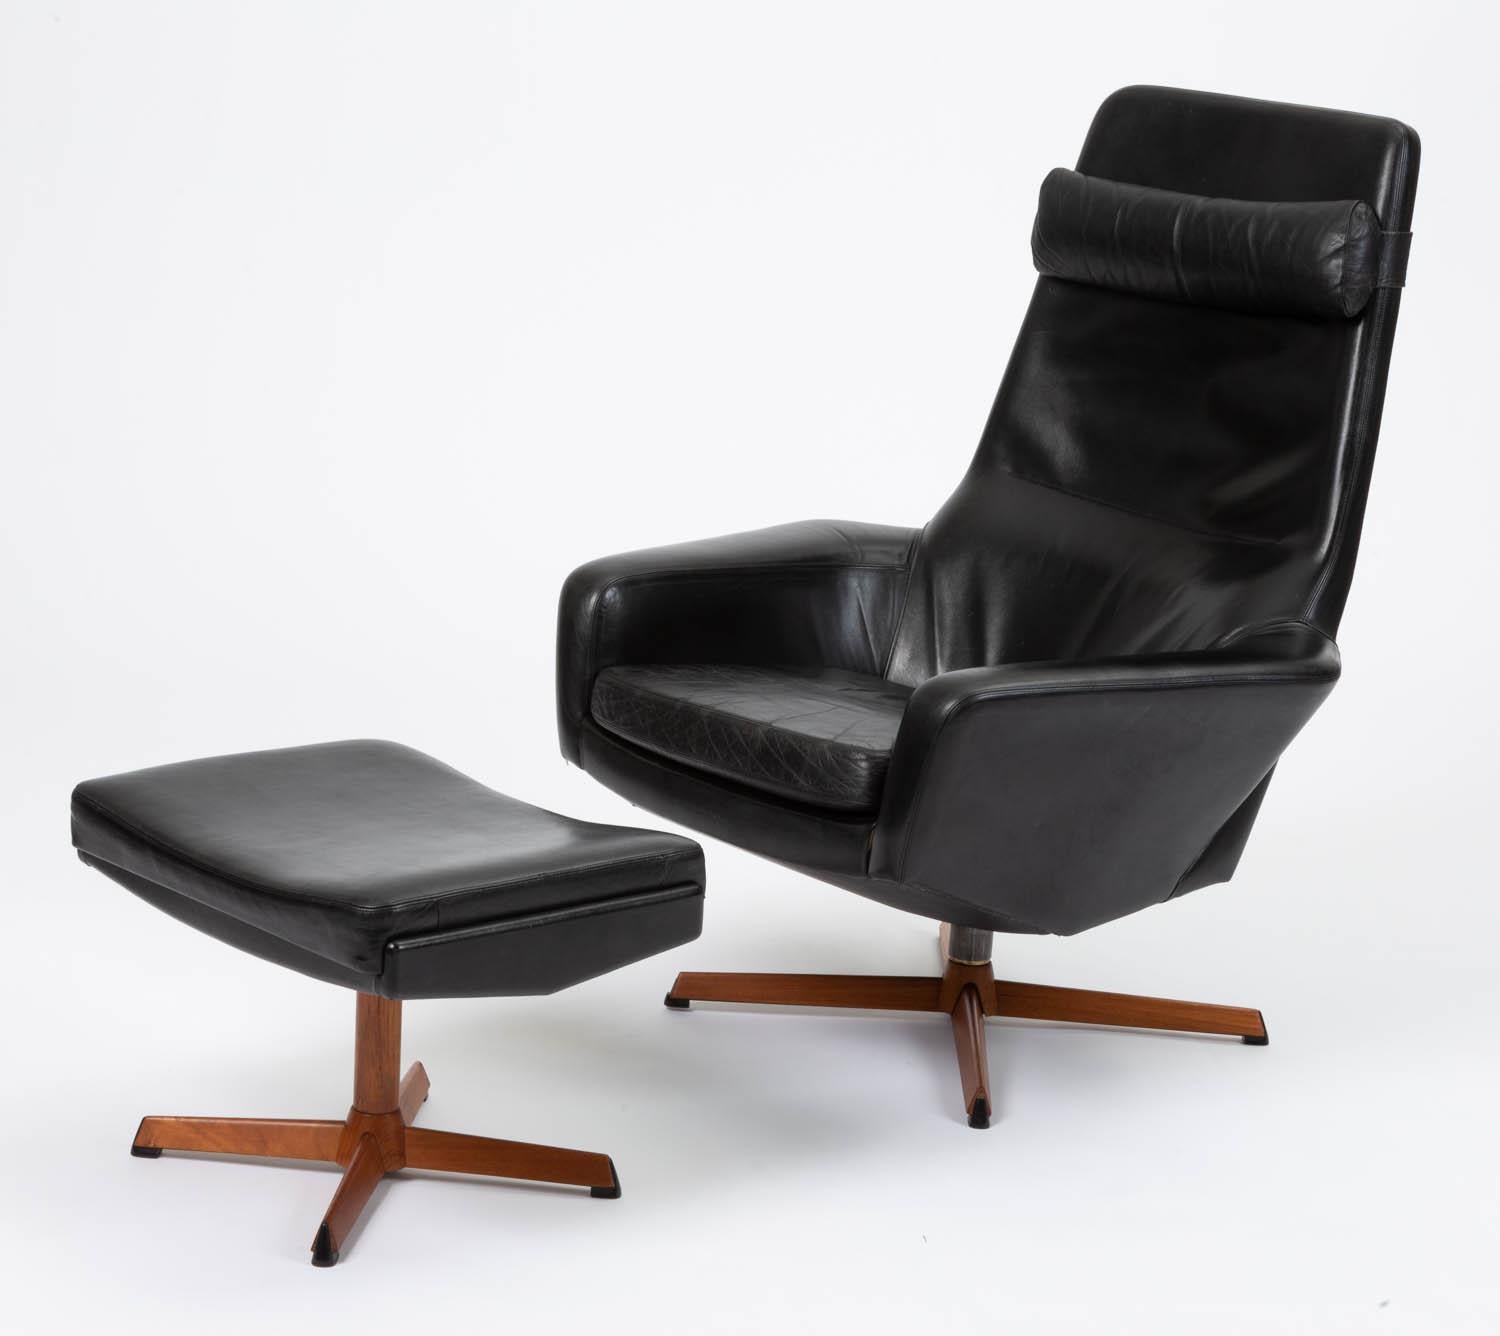 Lounge chair with ottoman by Ib Madsen & Acton Schübell for their brand Madsen & Schübell, Denmark, circa 1950s. The chair and ottoman retain original black leather upholstery and feature multiple settings for comfortable angle adjustments. There is